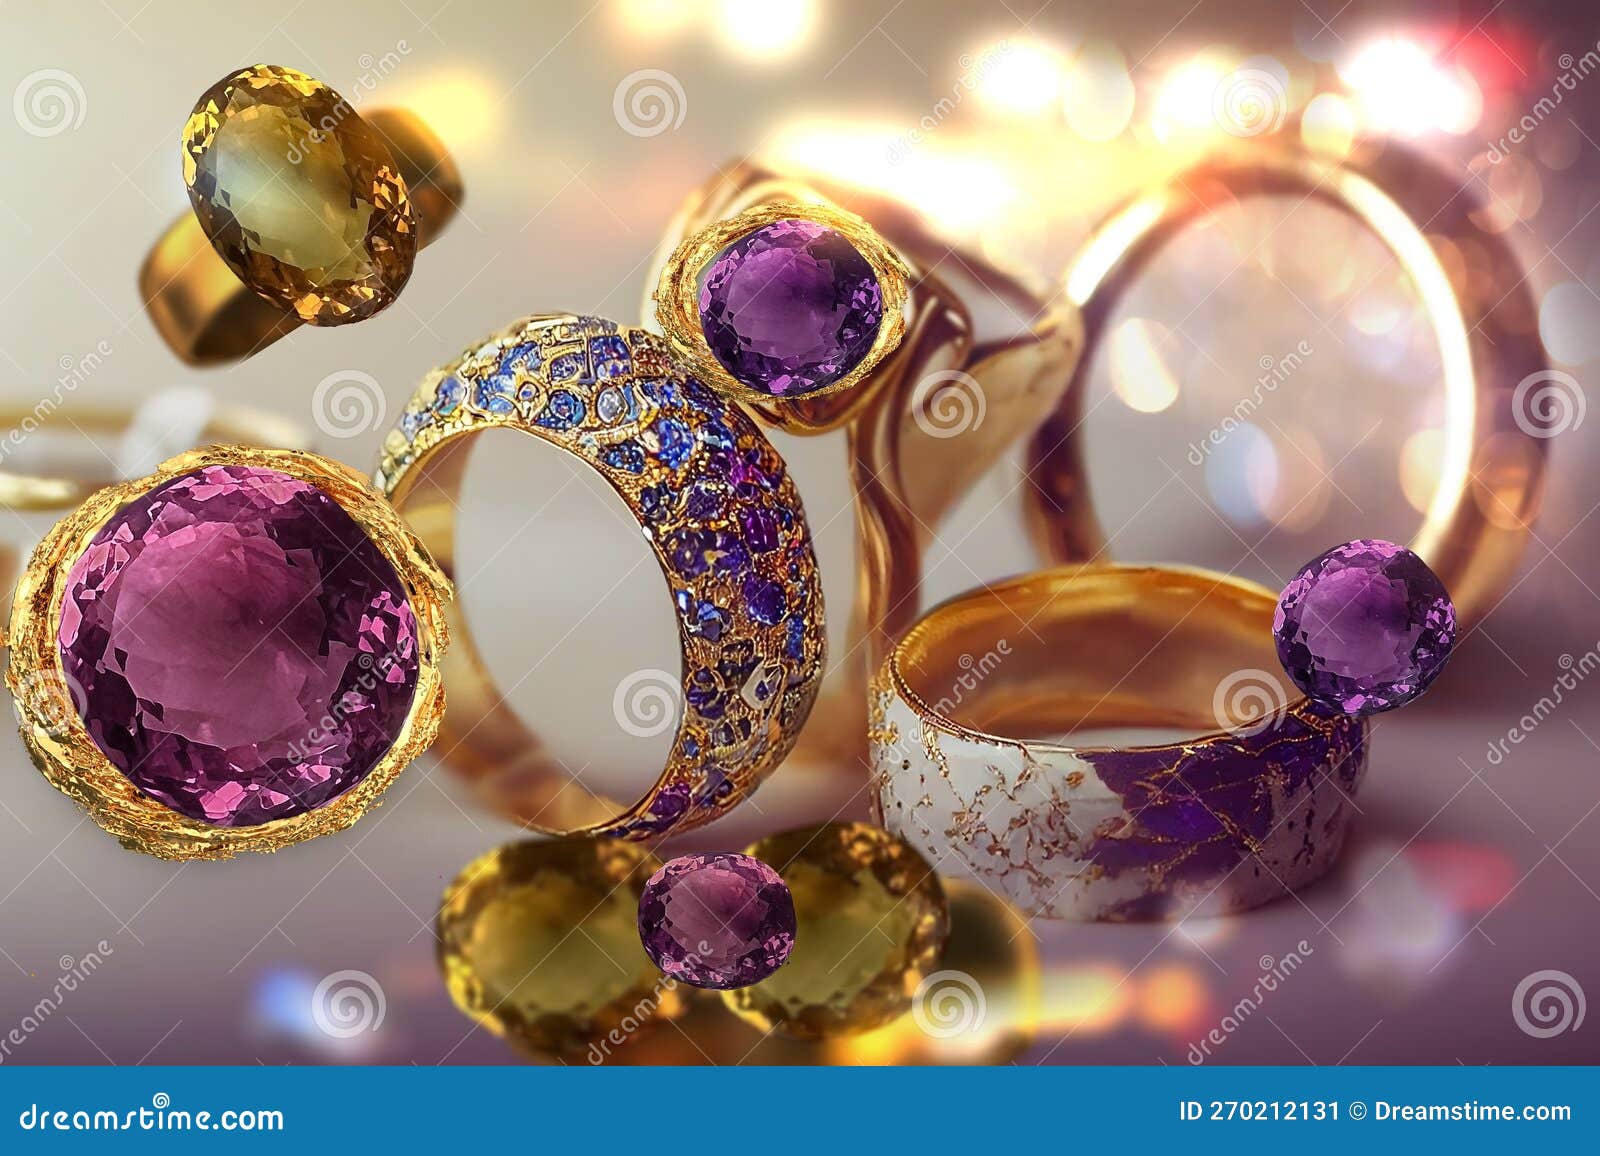 Jewelry Gold Ring Bracelets Earrings with Emerald and Colorful Pink Lilac  White Yellow Gemstone Luxury Women Wrap Fashion Jewelry Stock Illustration  - Illustration of colorful, elegant: 270212129